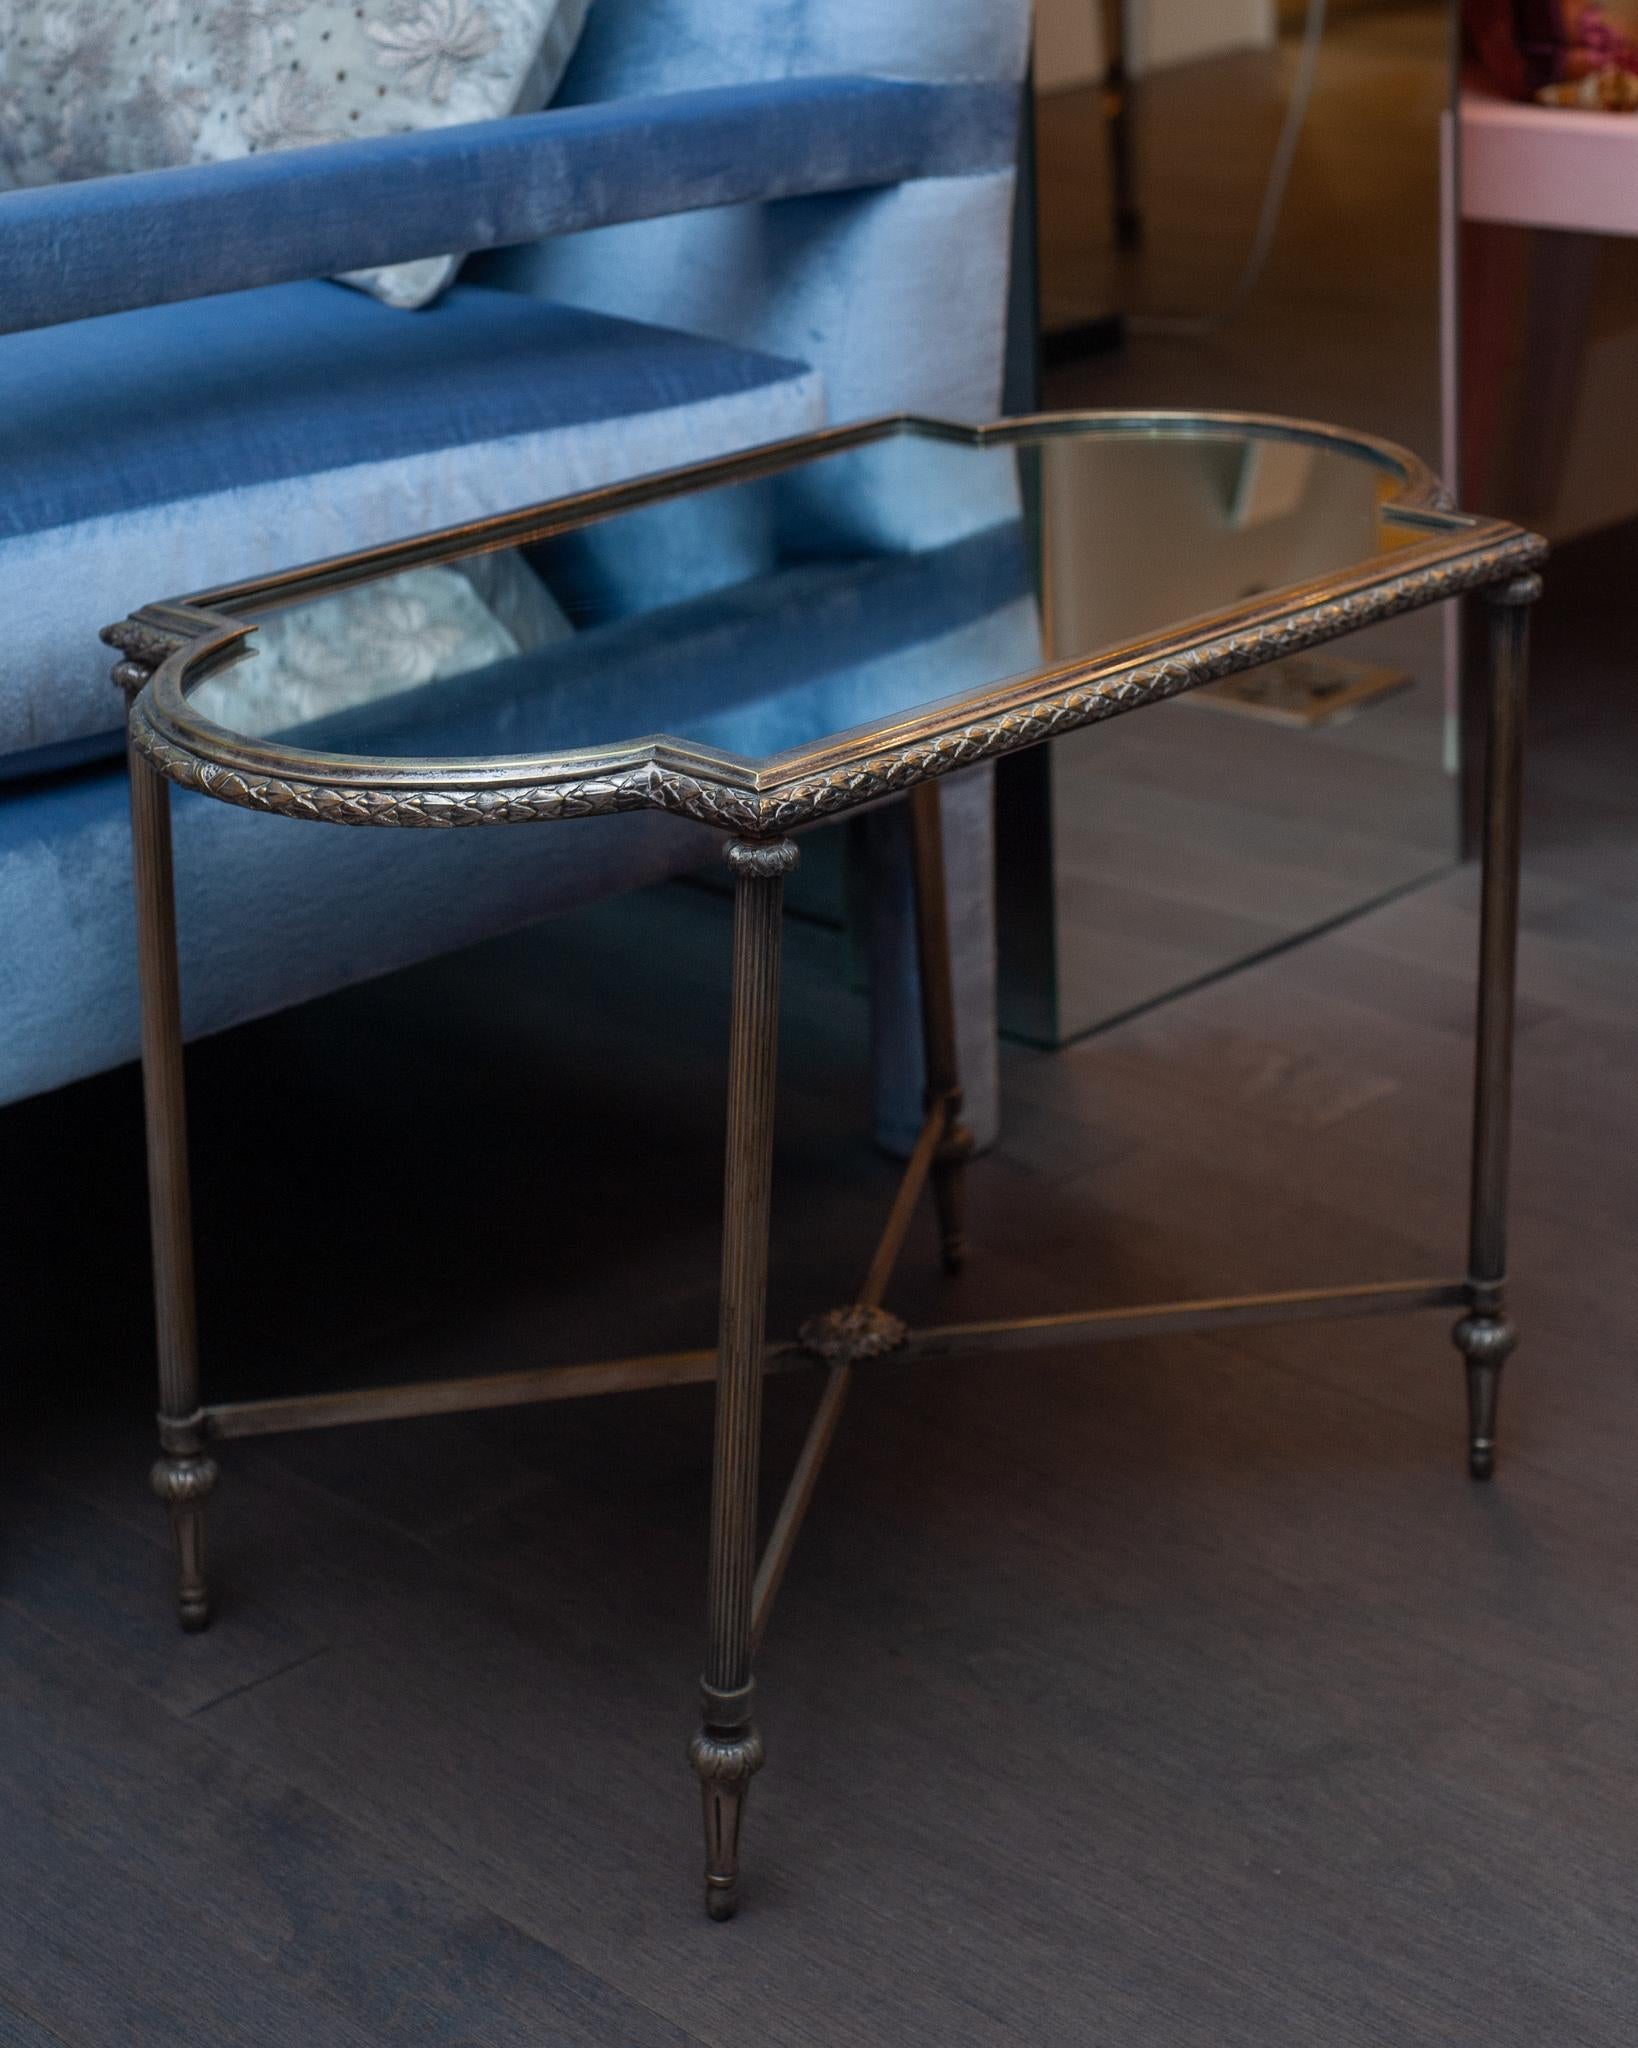 An exquisite French antique Christofle coffee table in silver metal with mirrored top. This beautiful table will add character and luxury to any neutral interior.